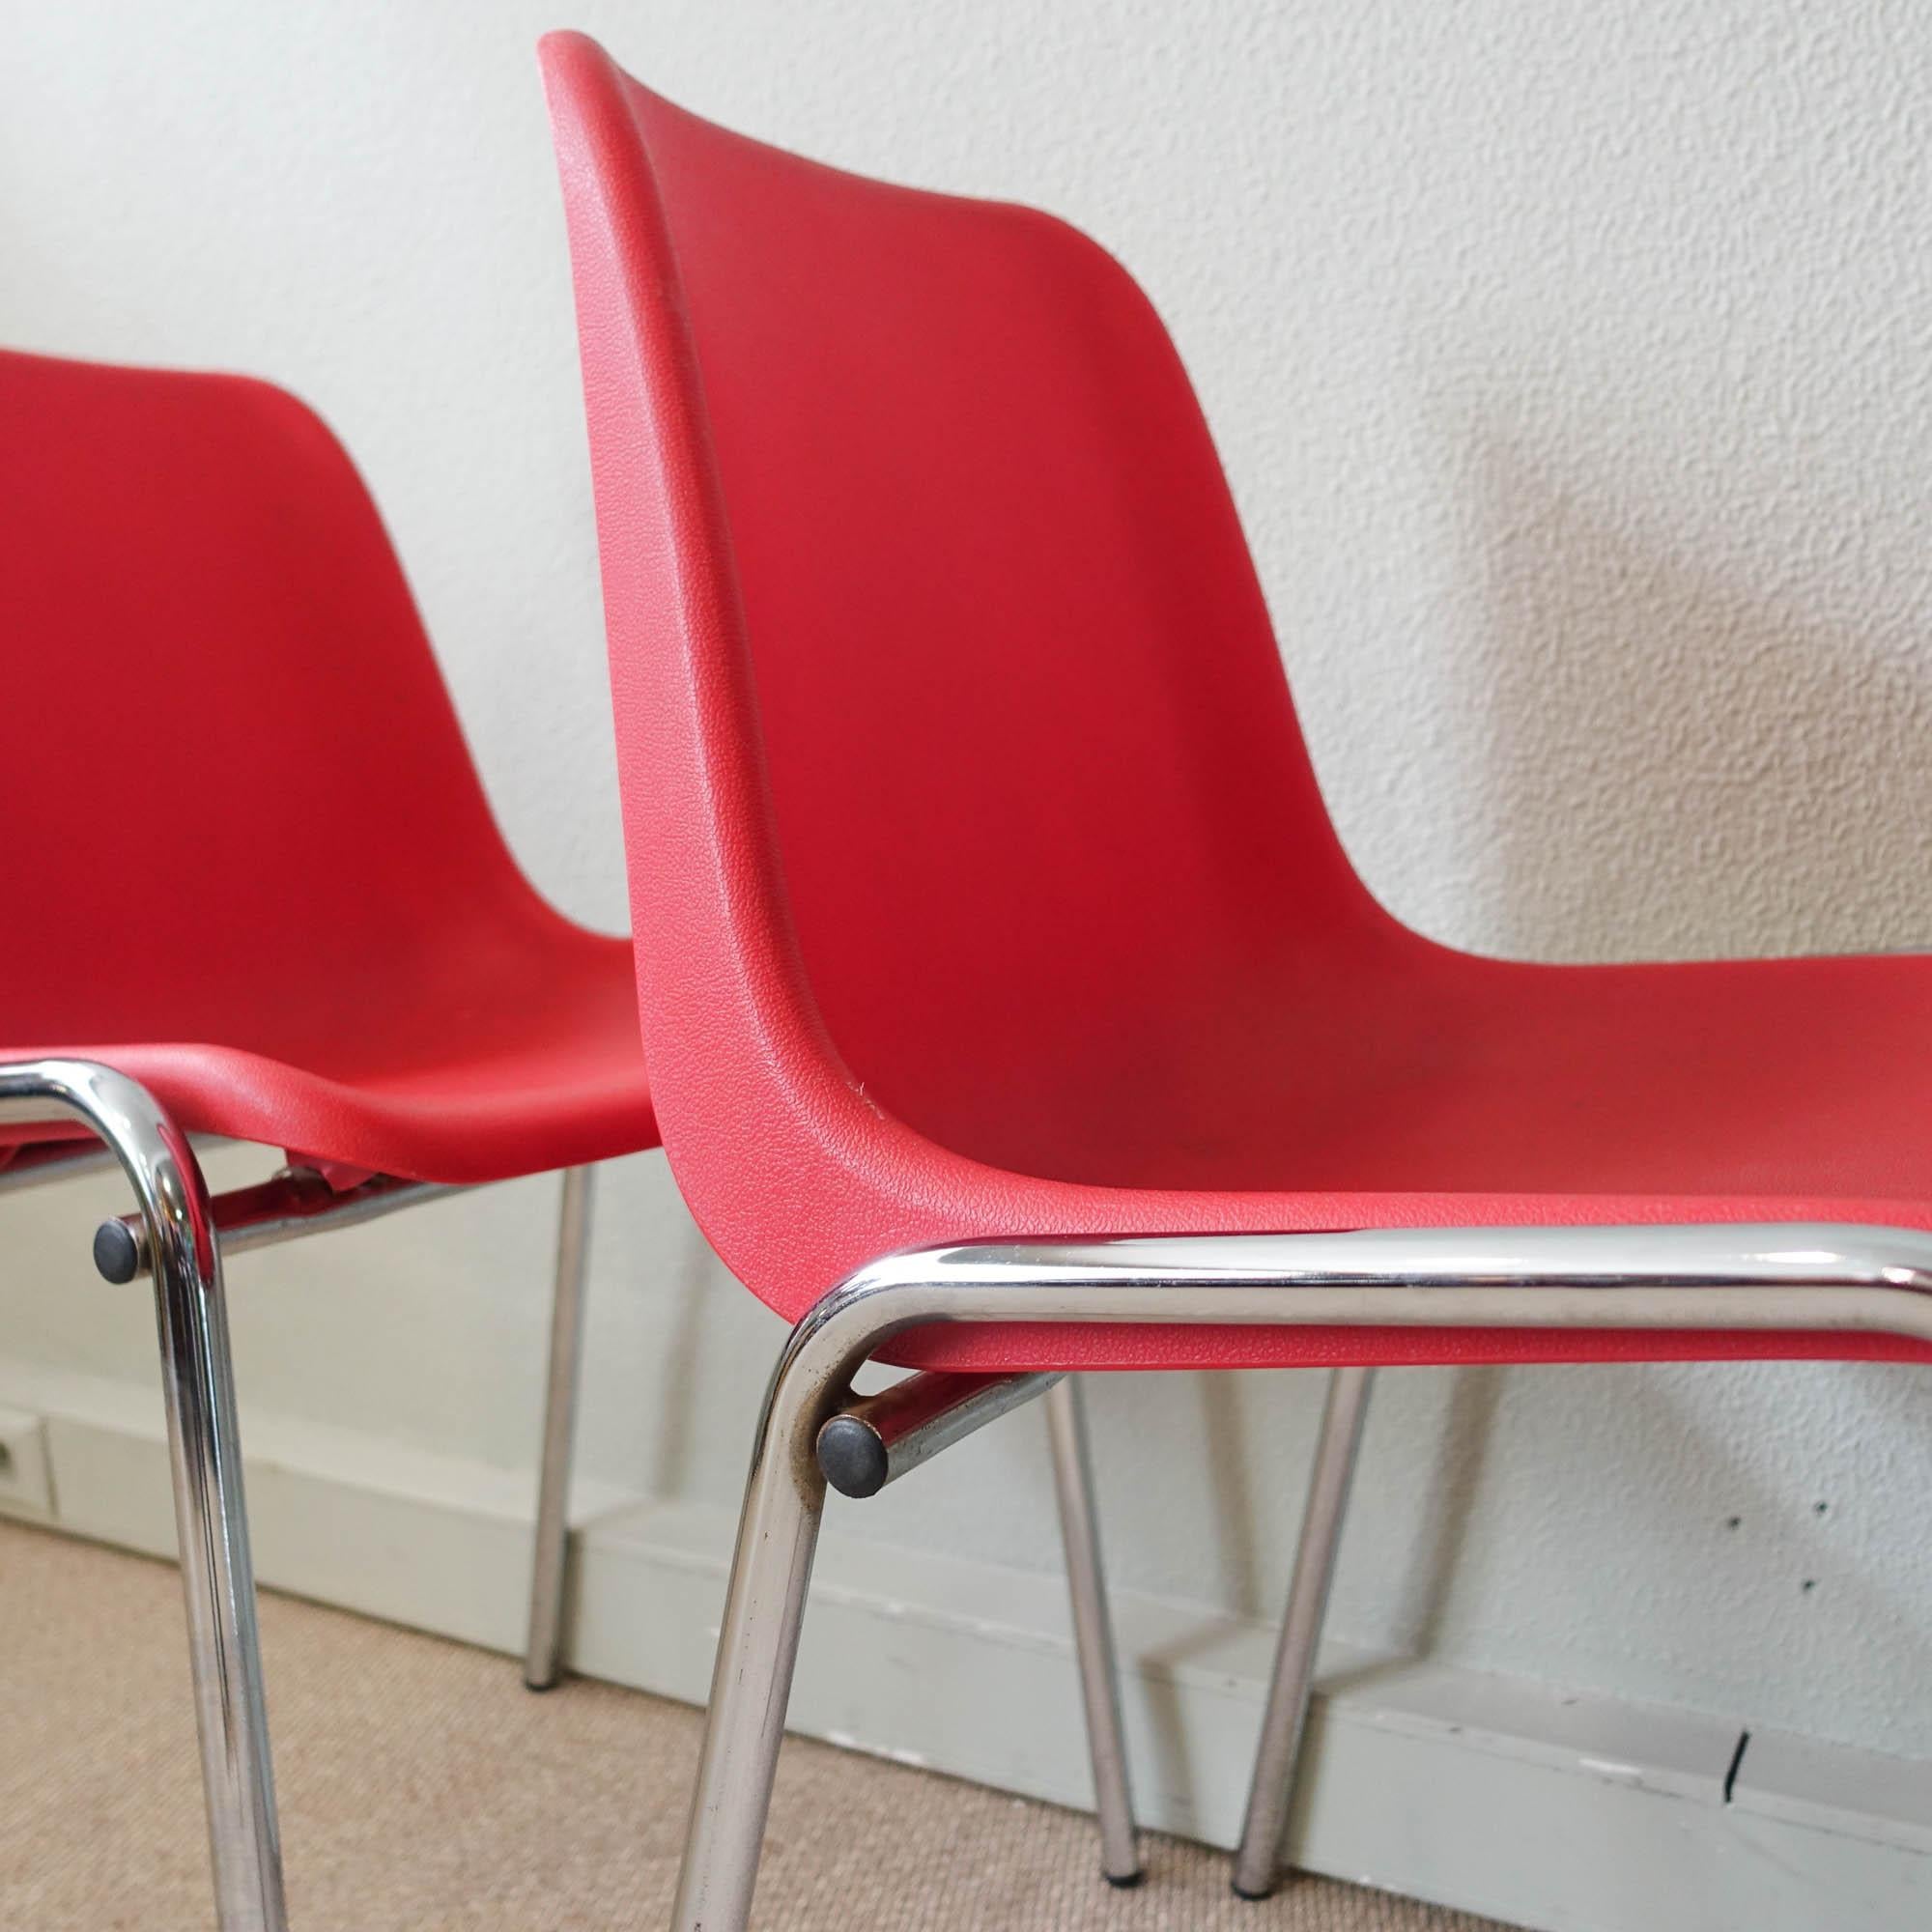 Set of 10 Multicolored Stackable Chairs in the Style of Helmut Starke, 1970s For Sale 8